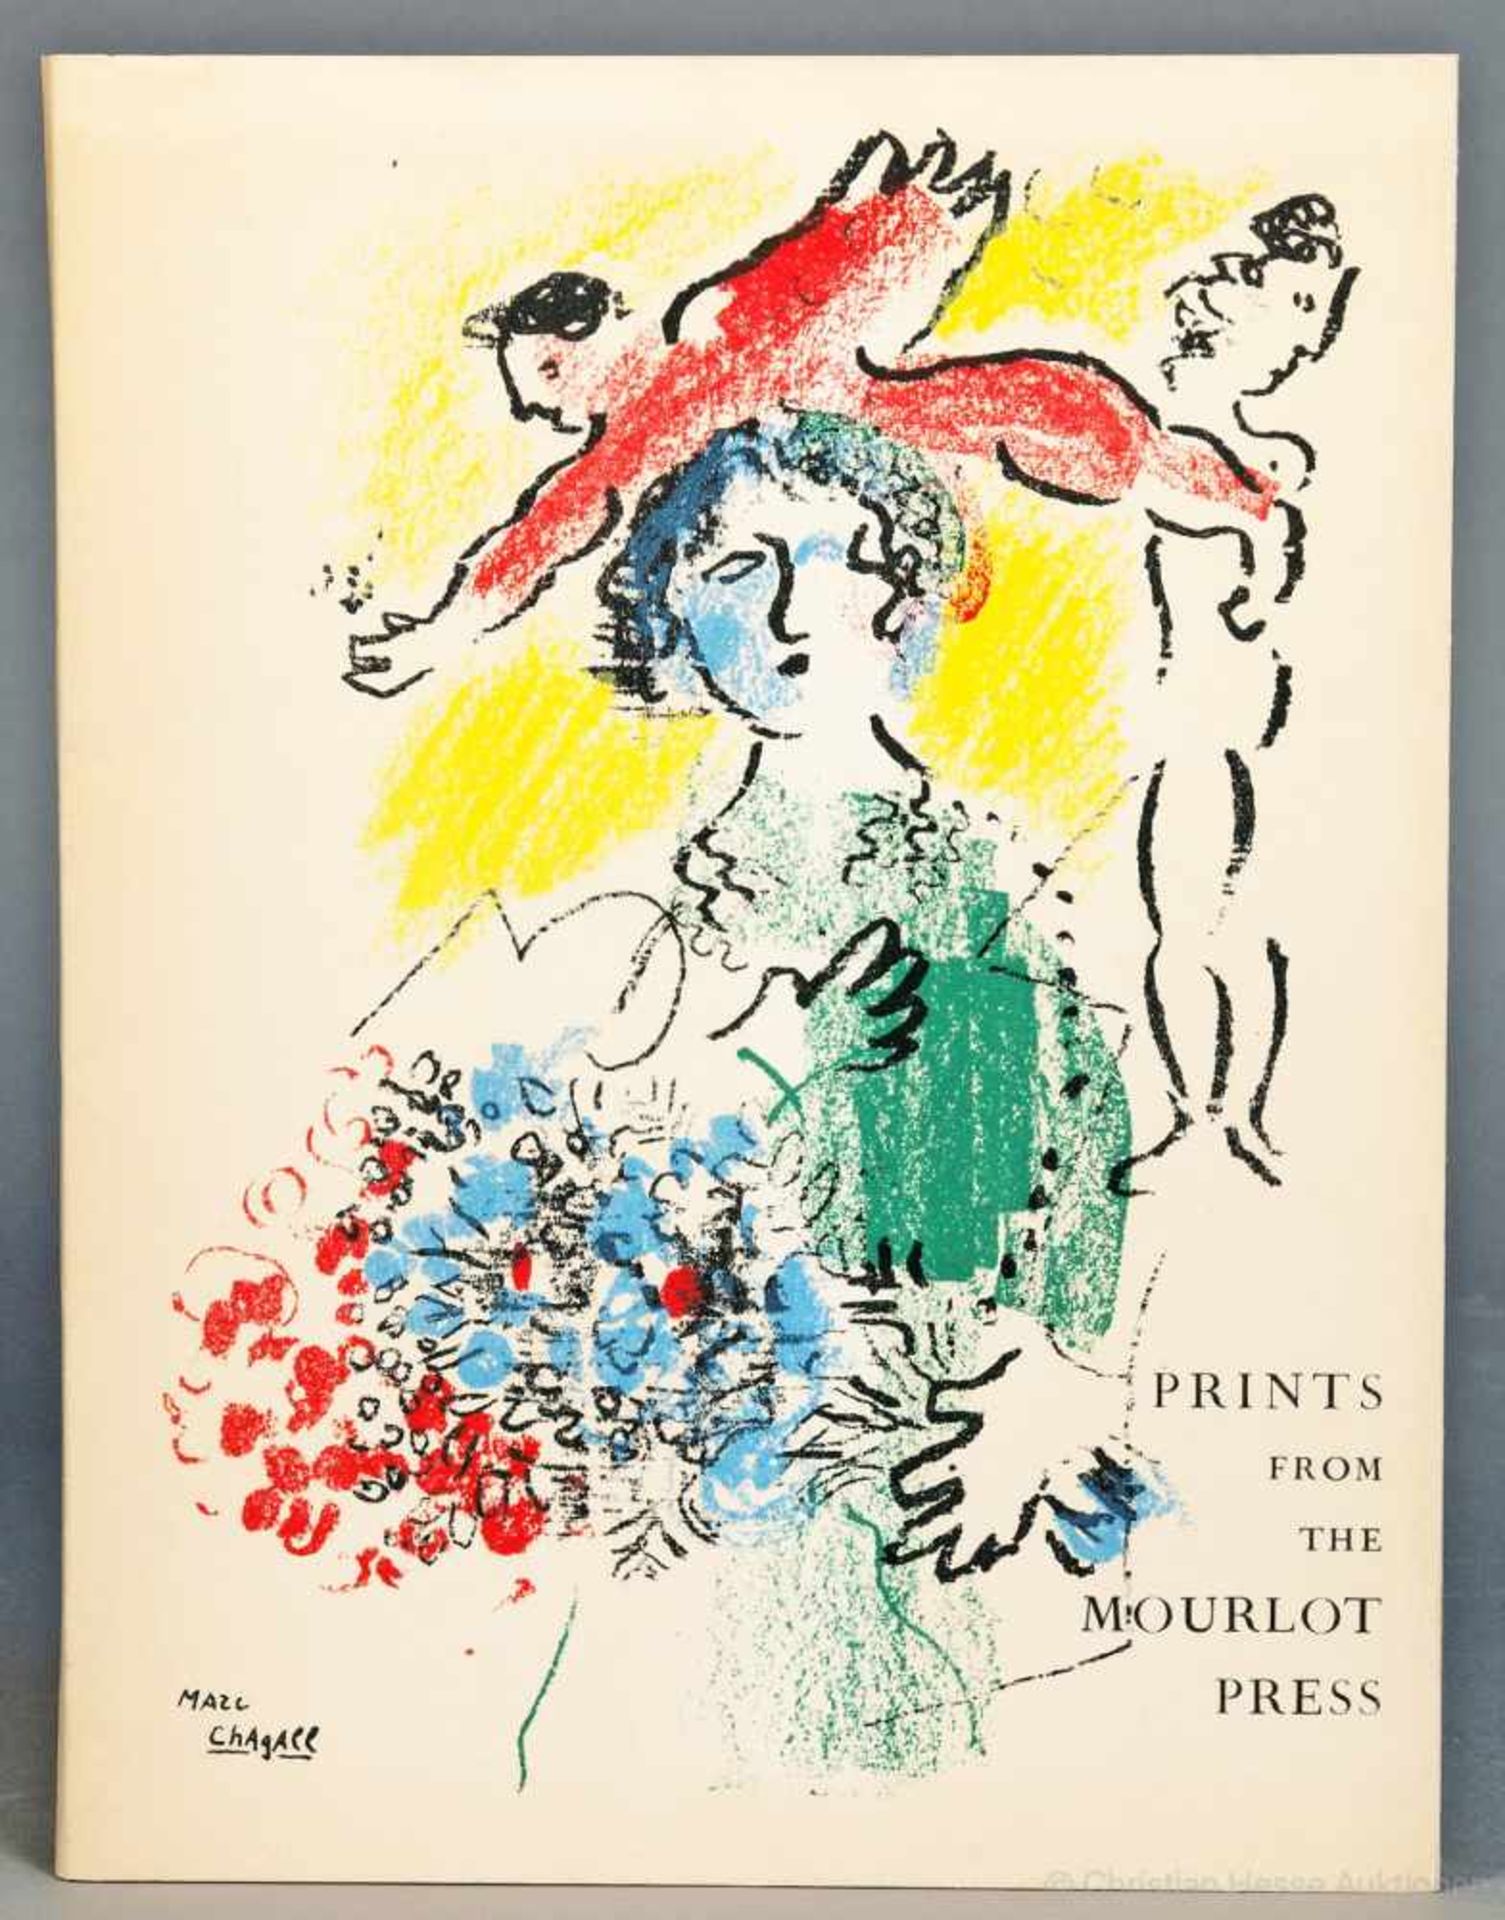 Prints from the Mourlot Press. Exhibition sponsored by the French Embassy. Circulated by the